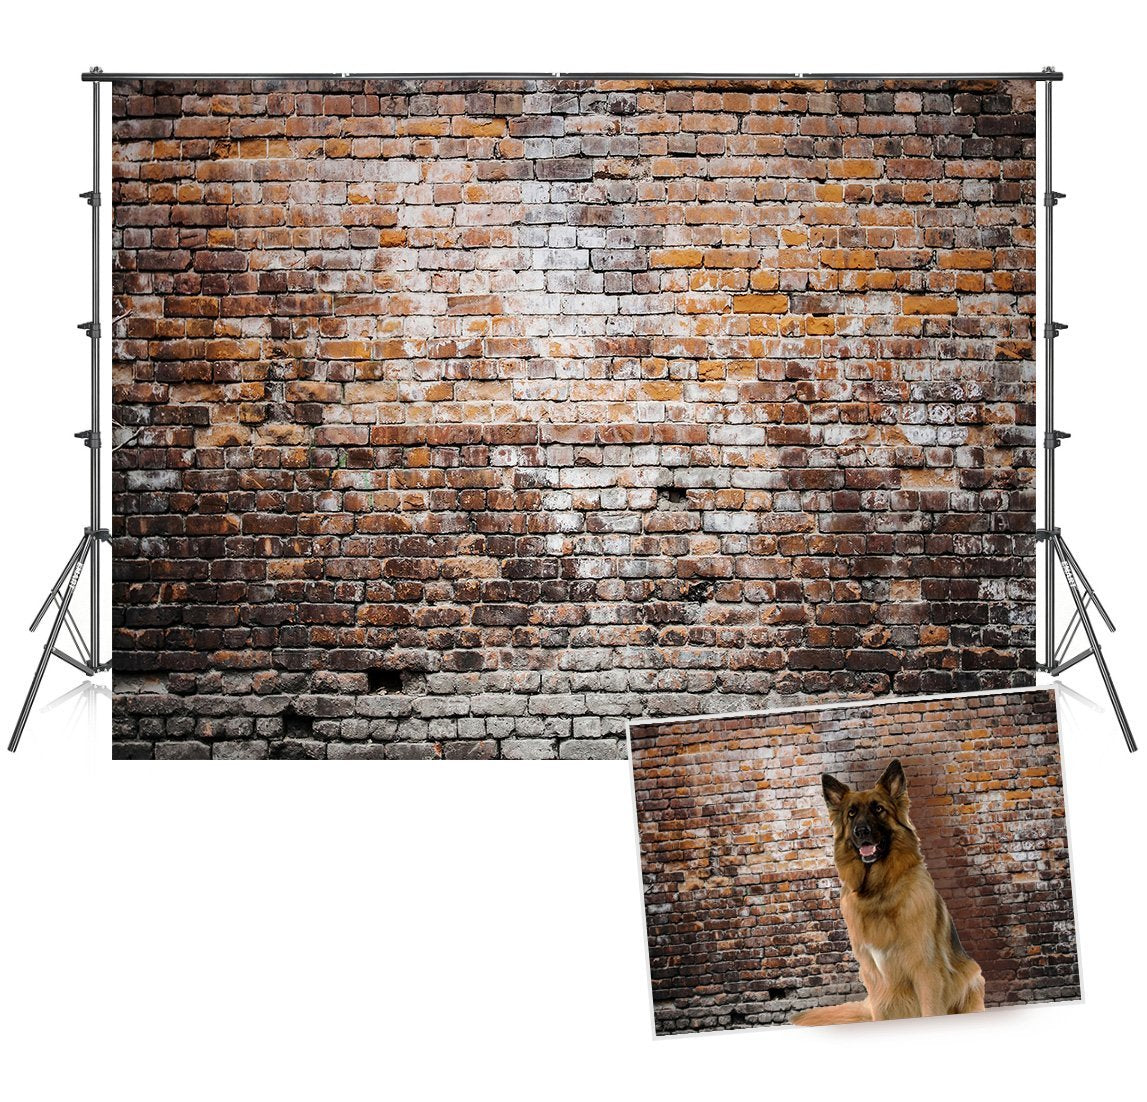 Vintage Brick Wall Backdrops Retro Background for Photography Prop